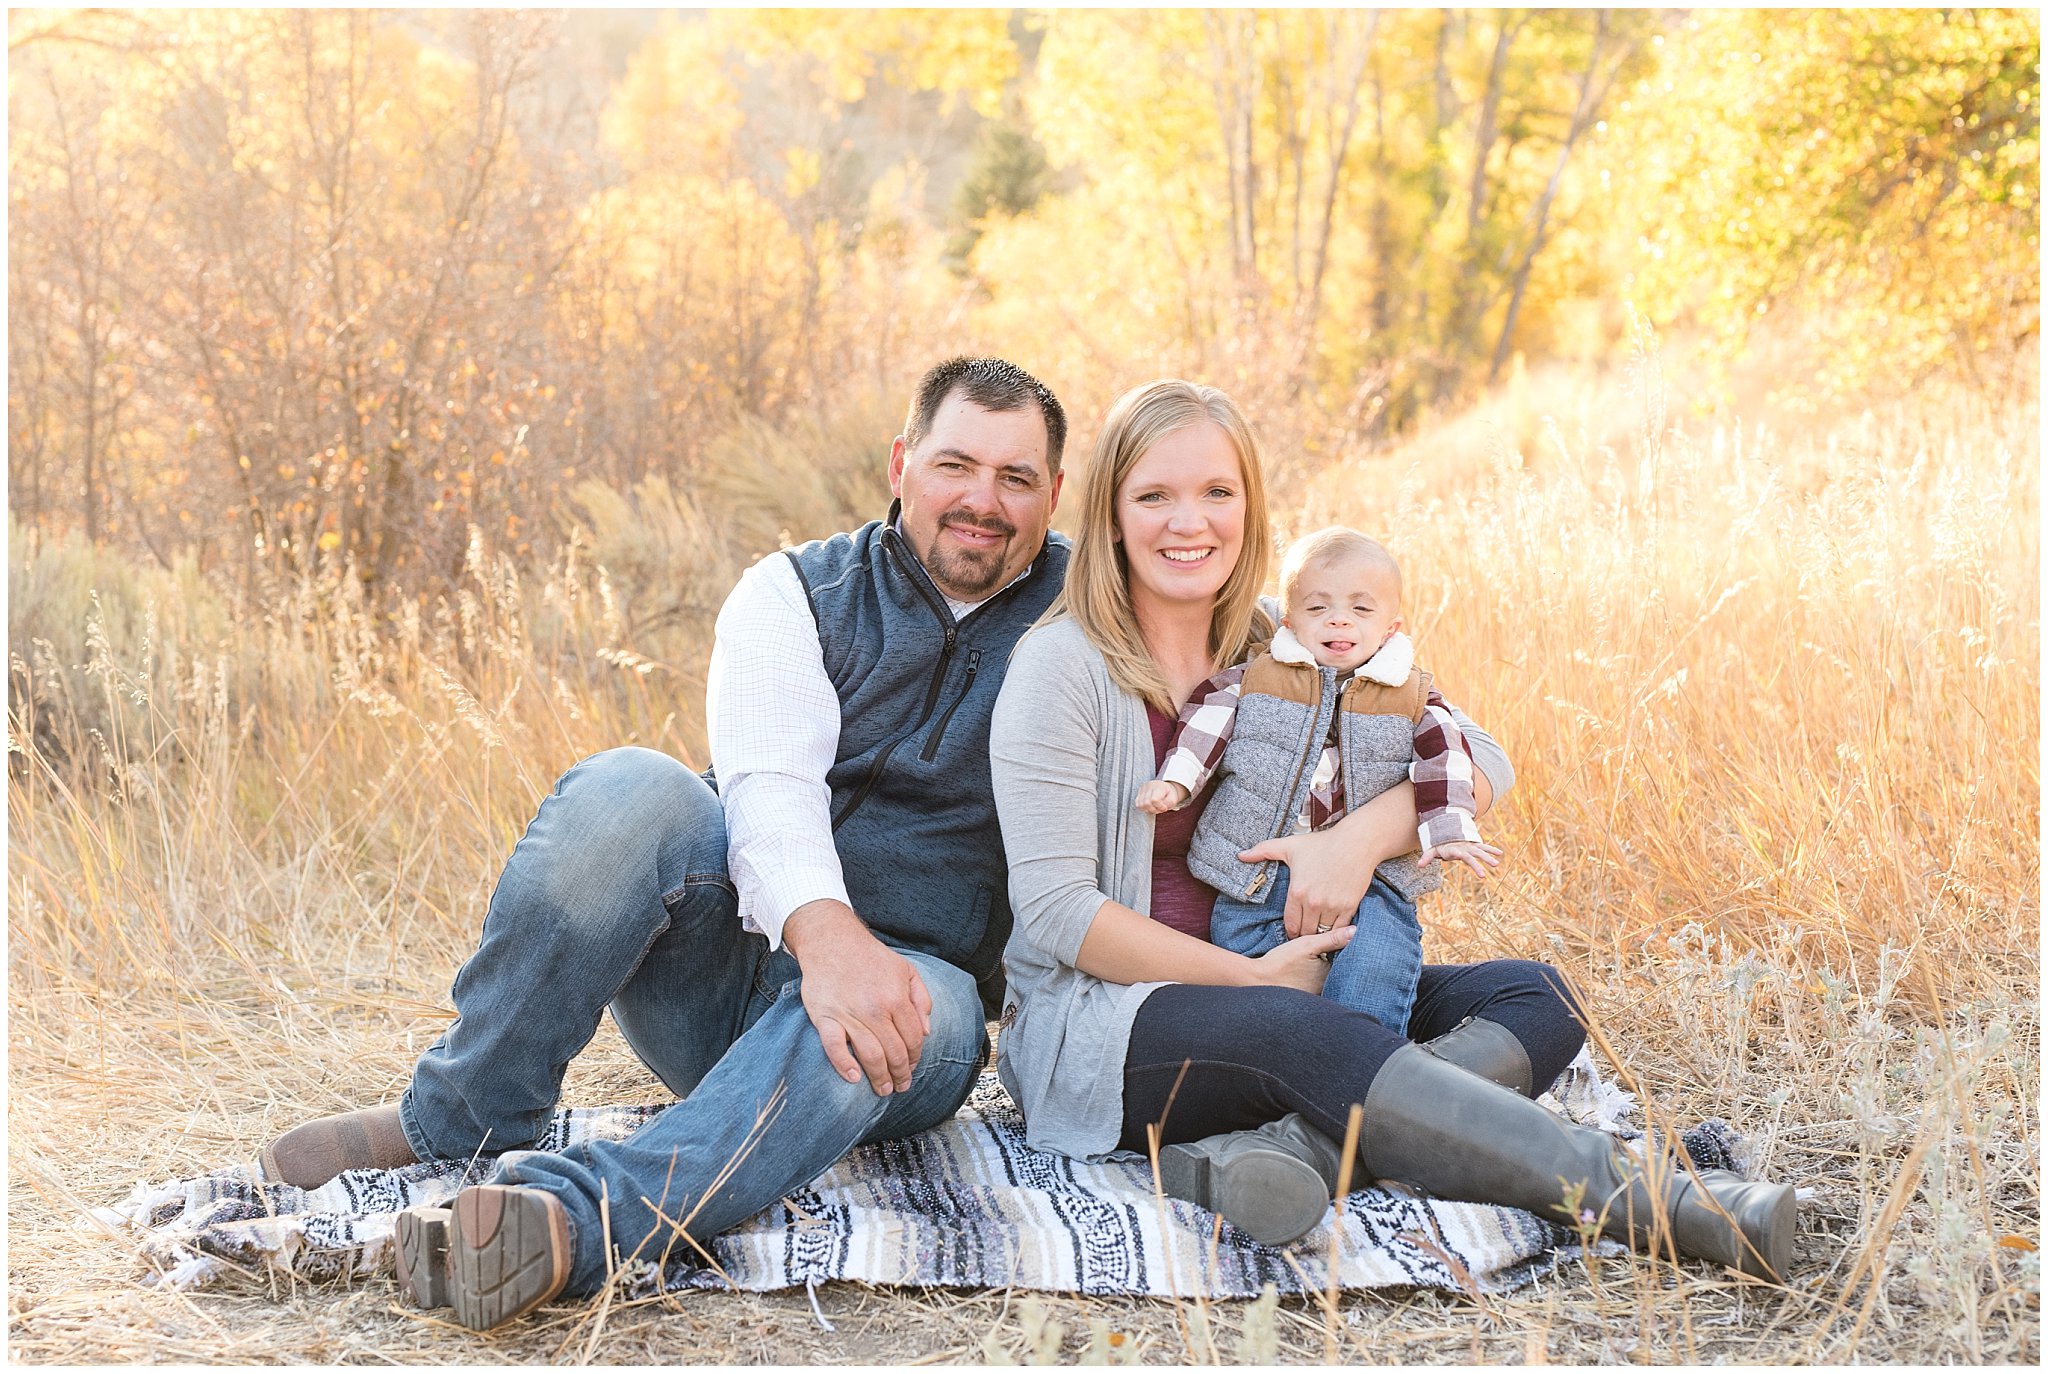 Mom, Dad and infant in the fall leaves | Fall family photo session at Snowbasin | Snowbasin Resort | Jessie and Dallin Photography